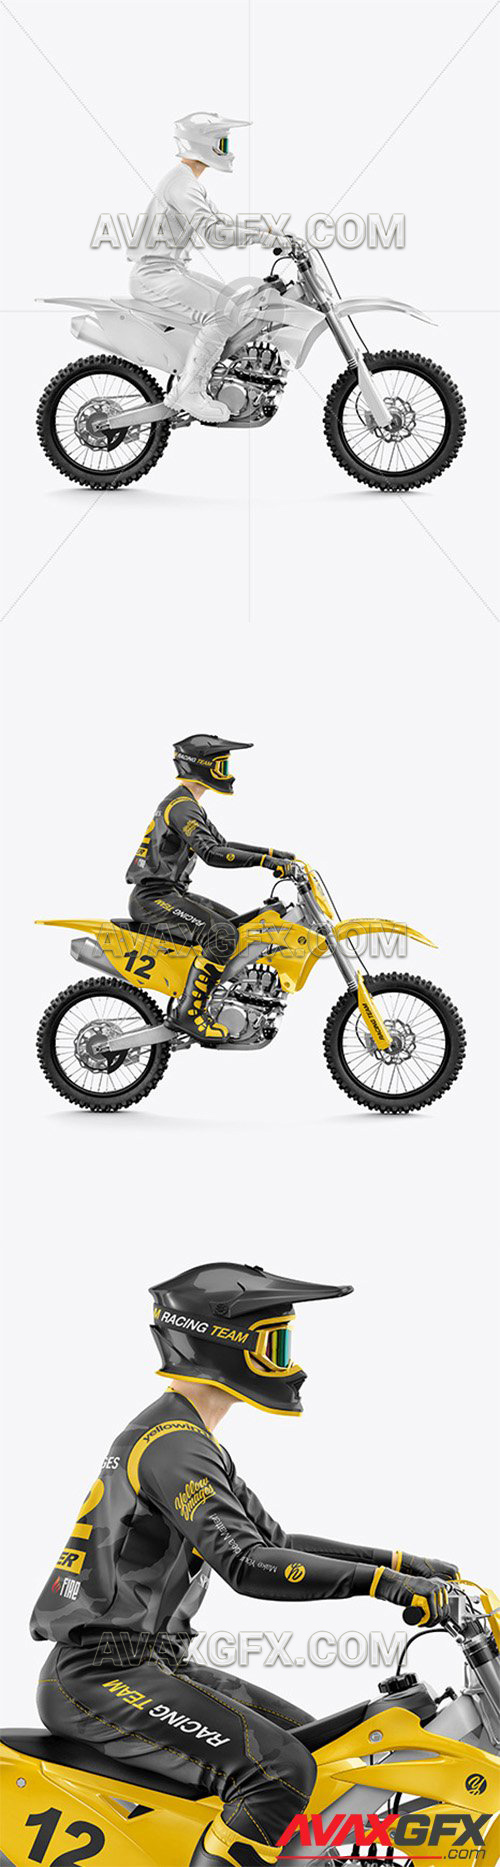 Download 35+ Motocross Racing Kit Mockup Images Yellowimages - Free ...